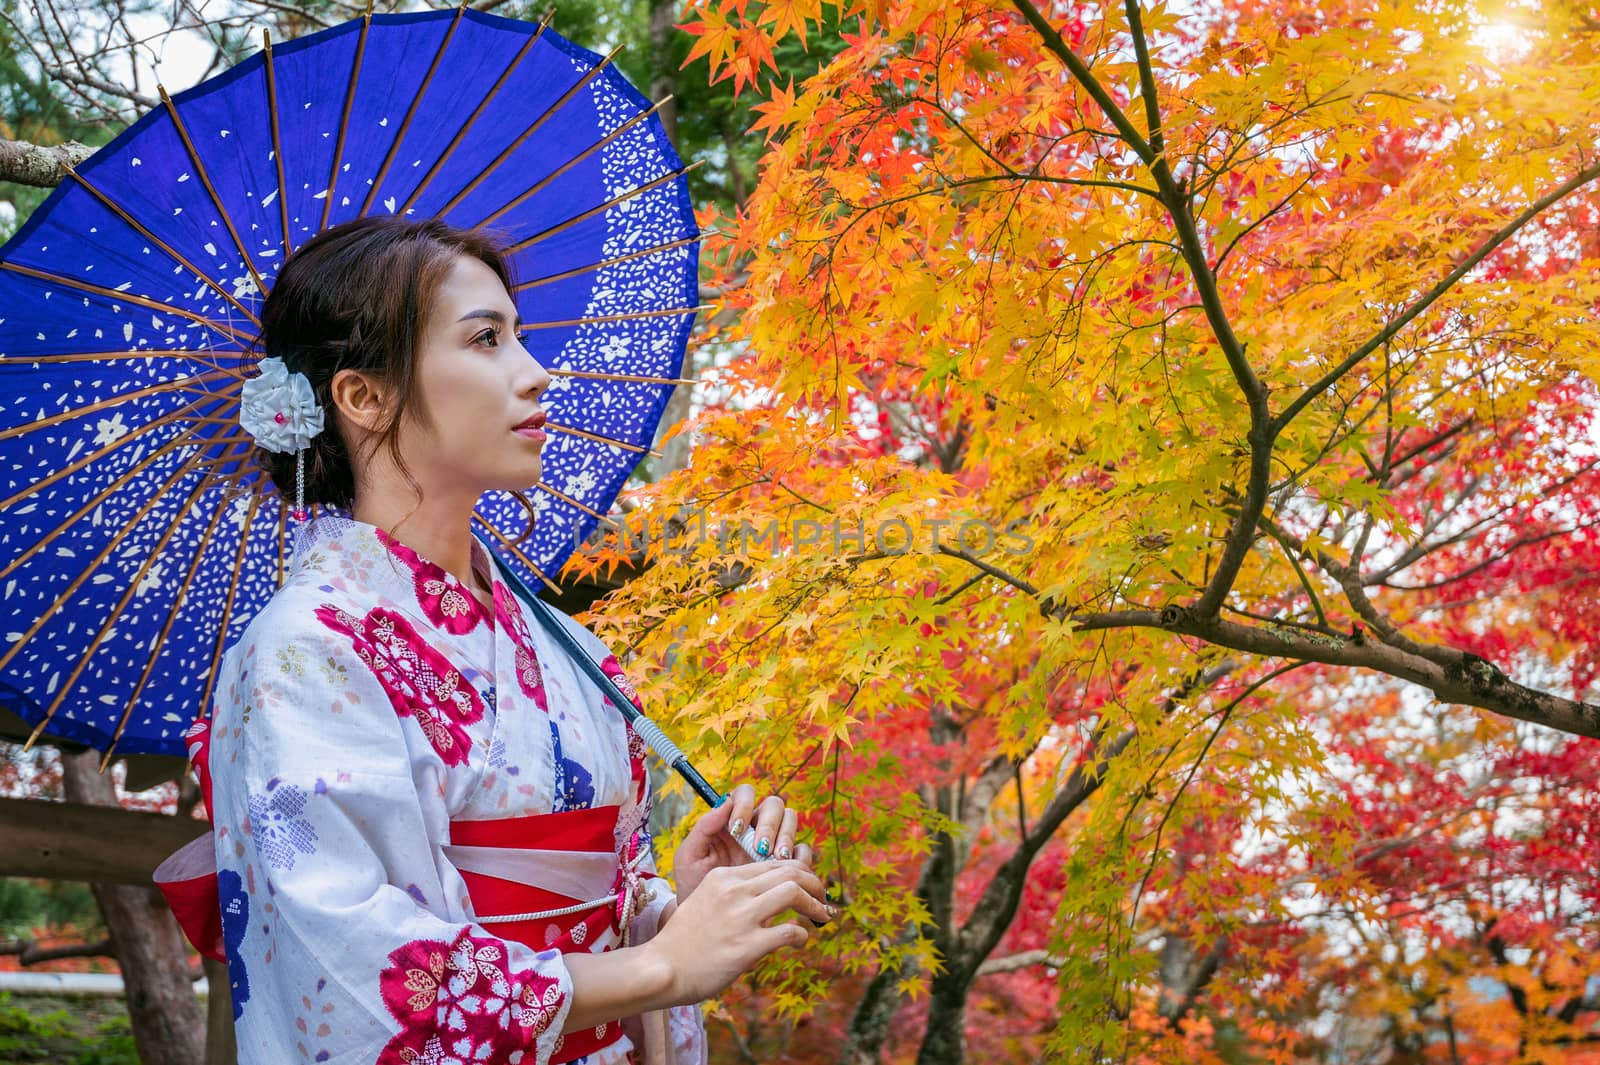 Asian woman wearing japanese traditional kimono with umbrella in autumn park. Japan